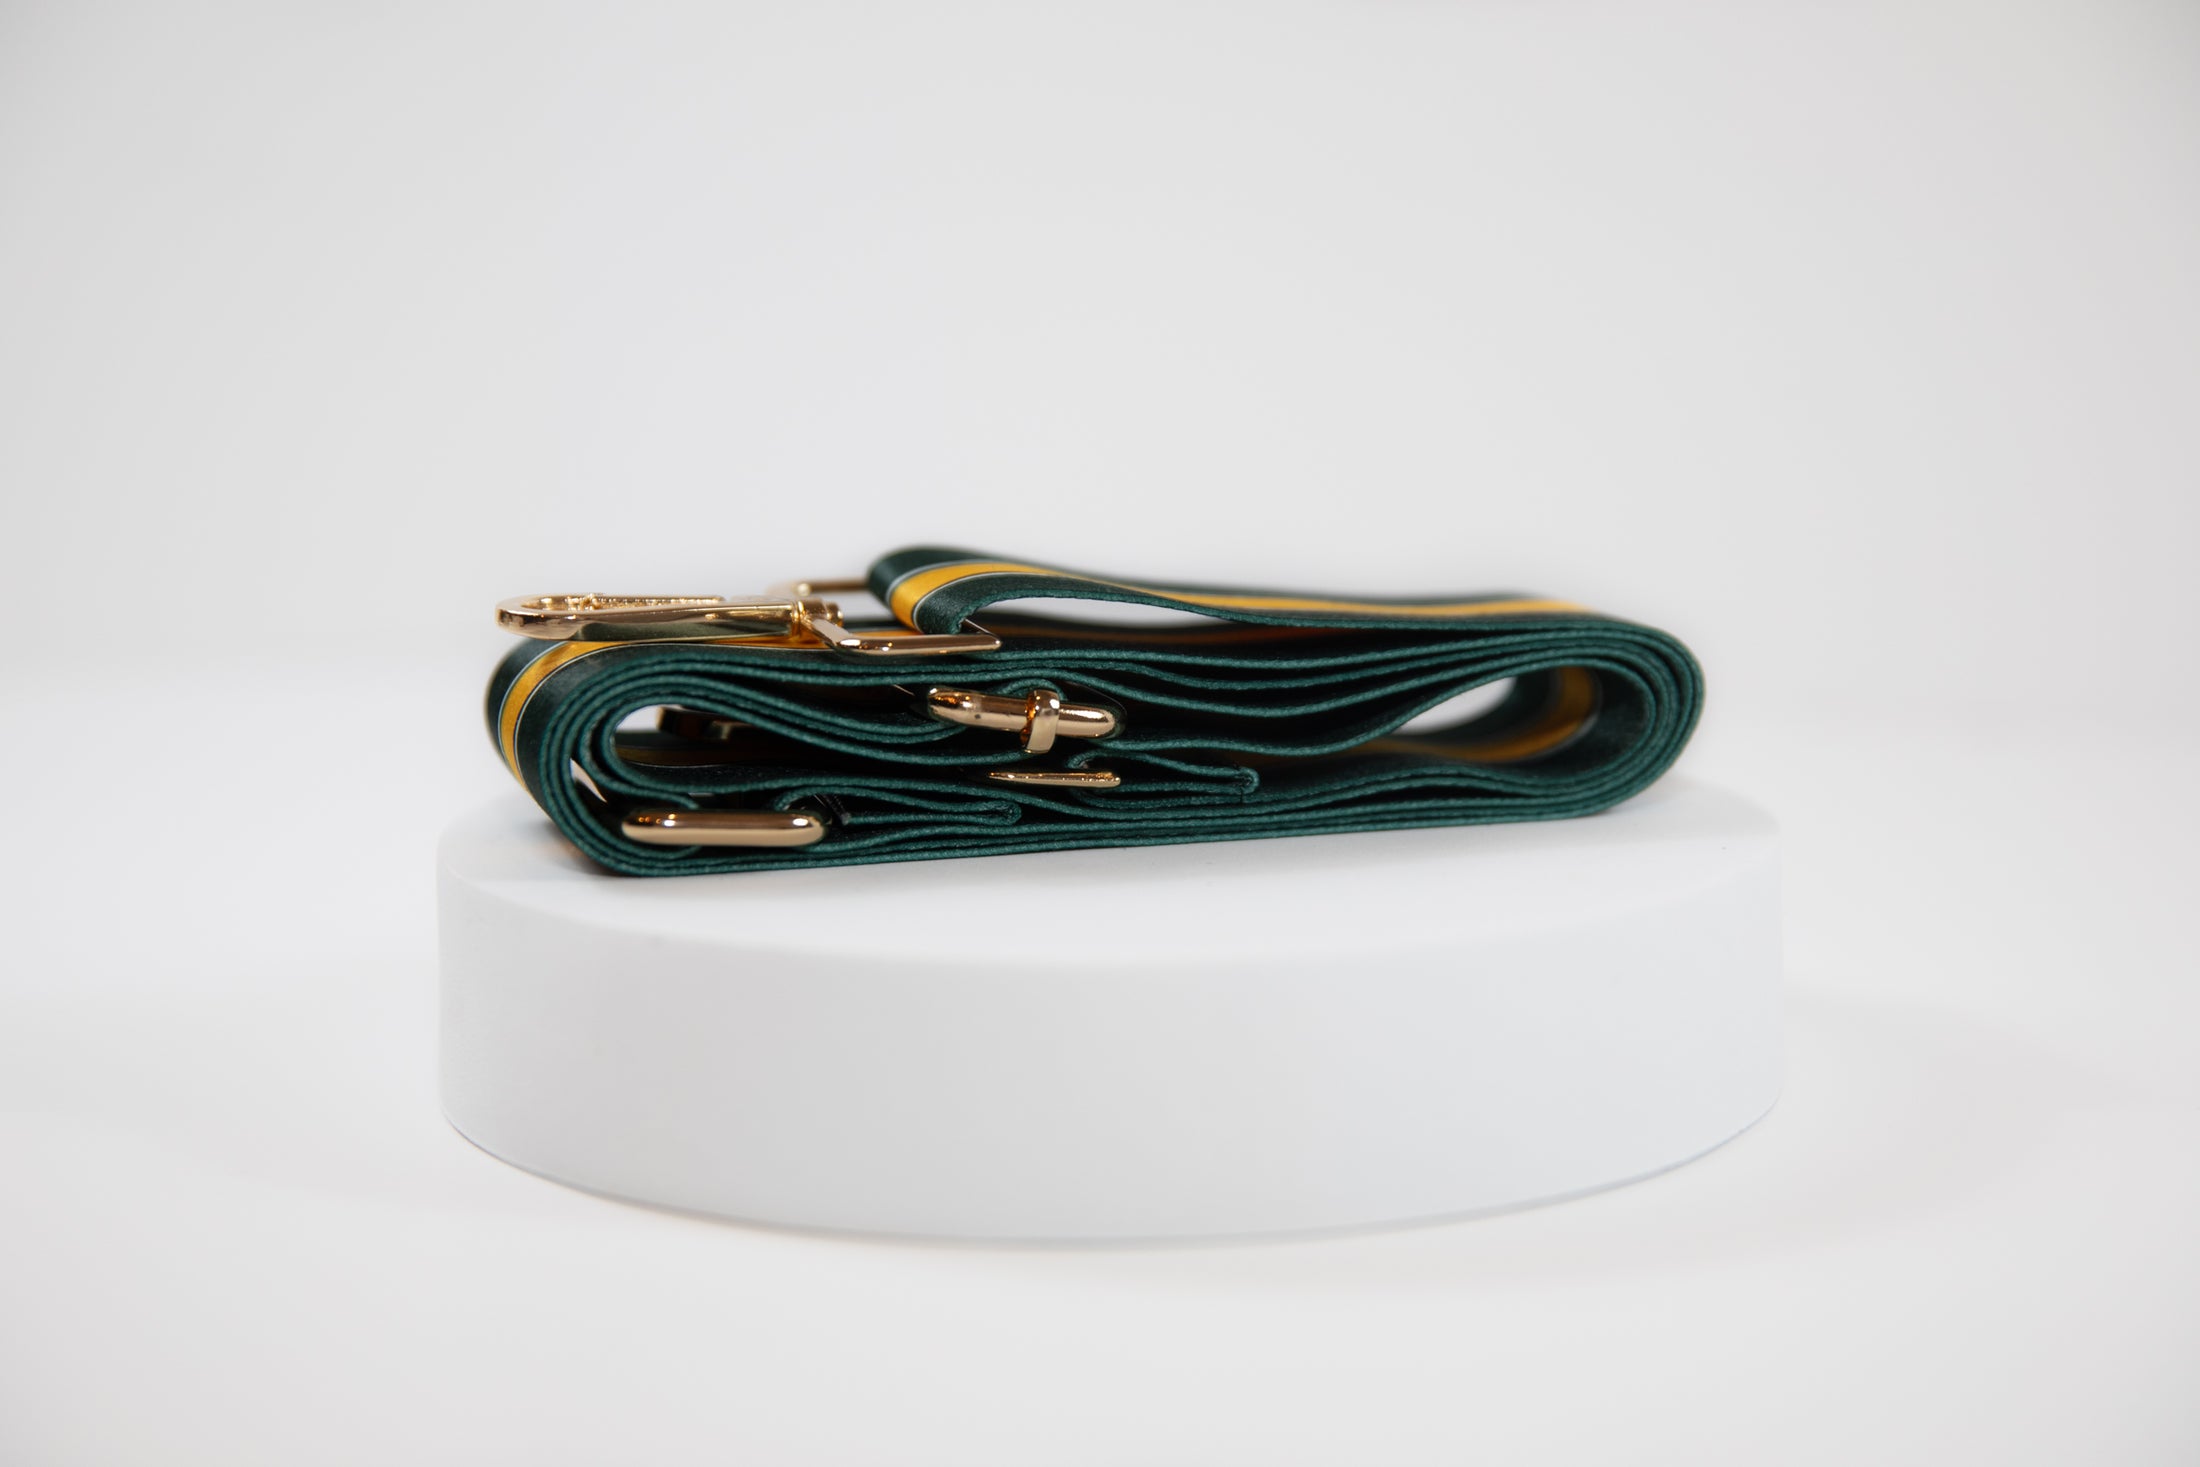 Elegant crossbody strap shown in Green Bay Packers green and gold team colors